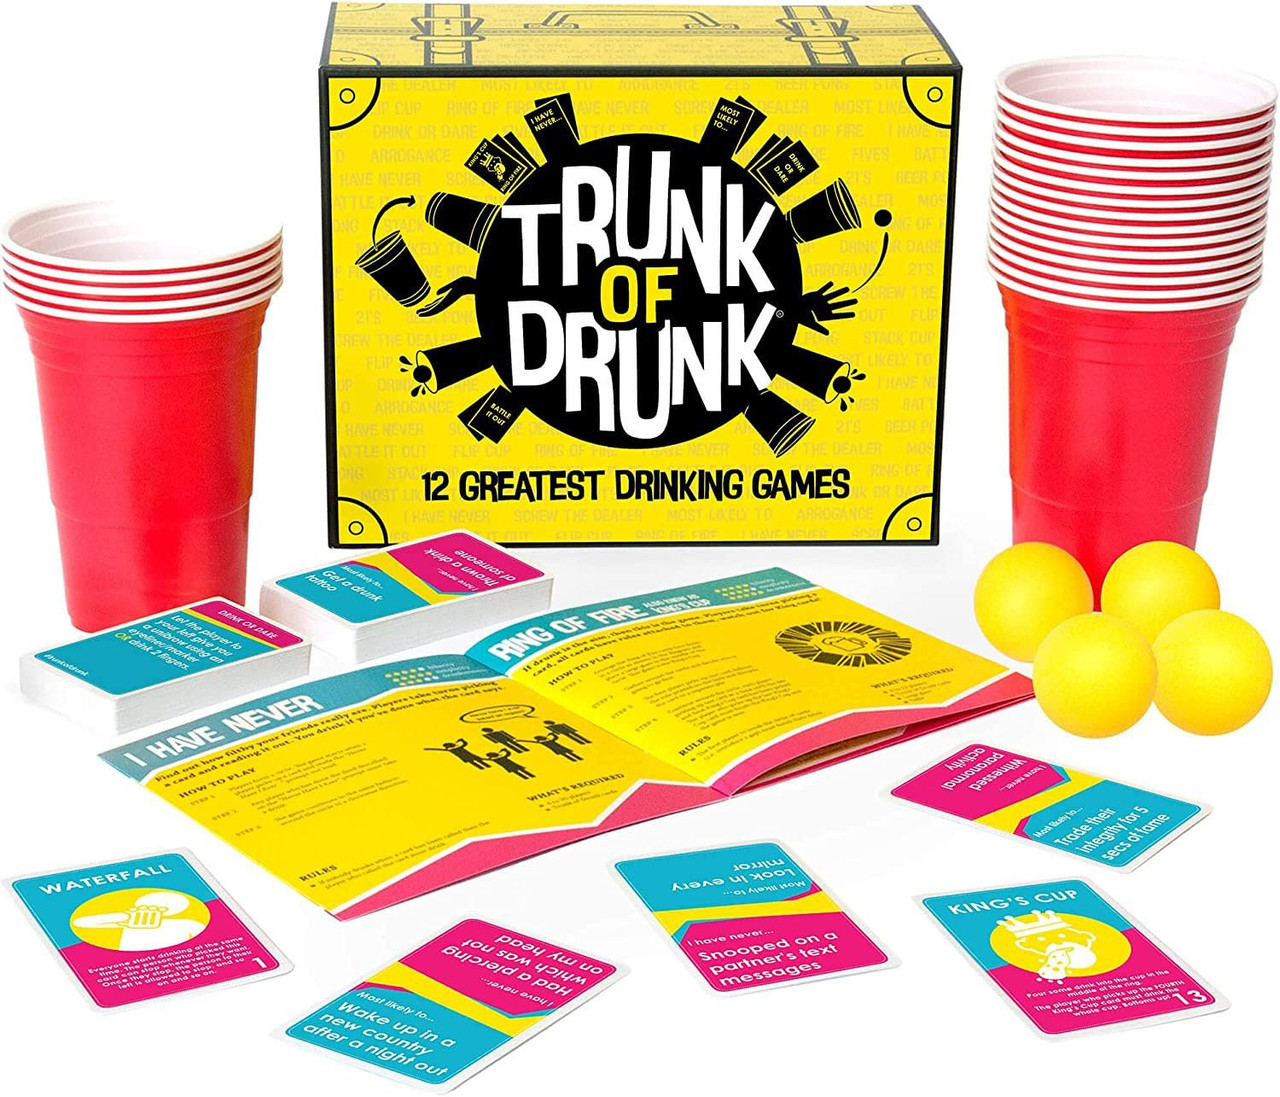 Trunk of Drunk Drinking Game